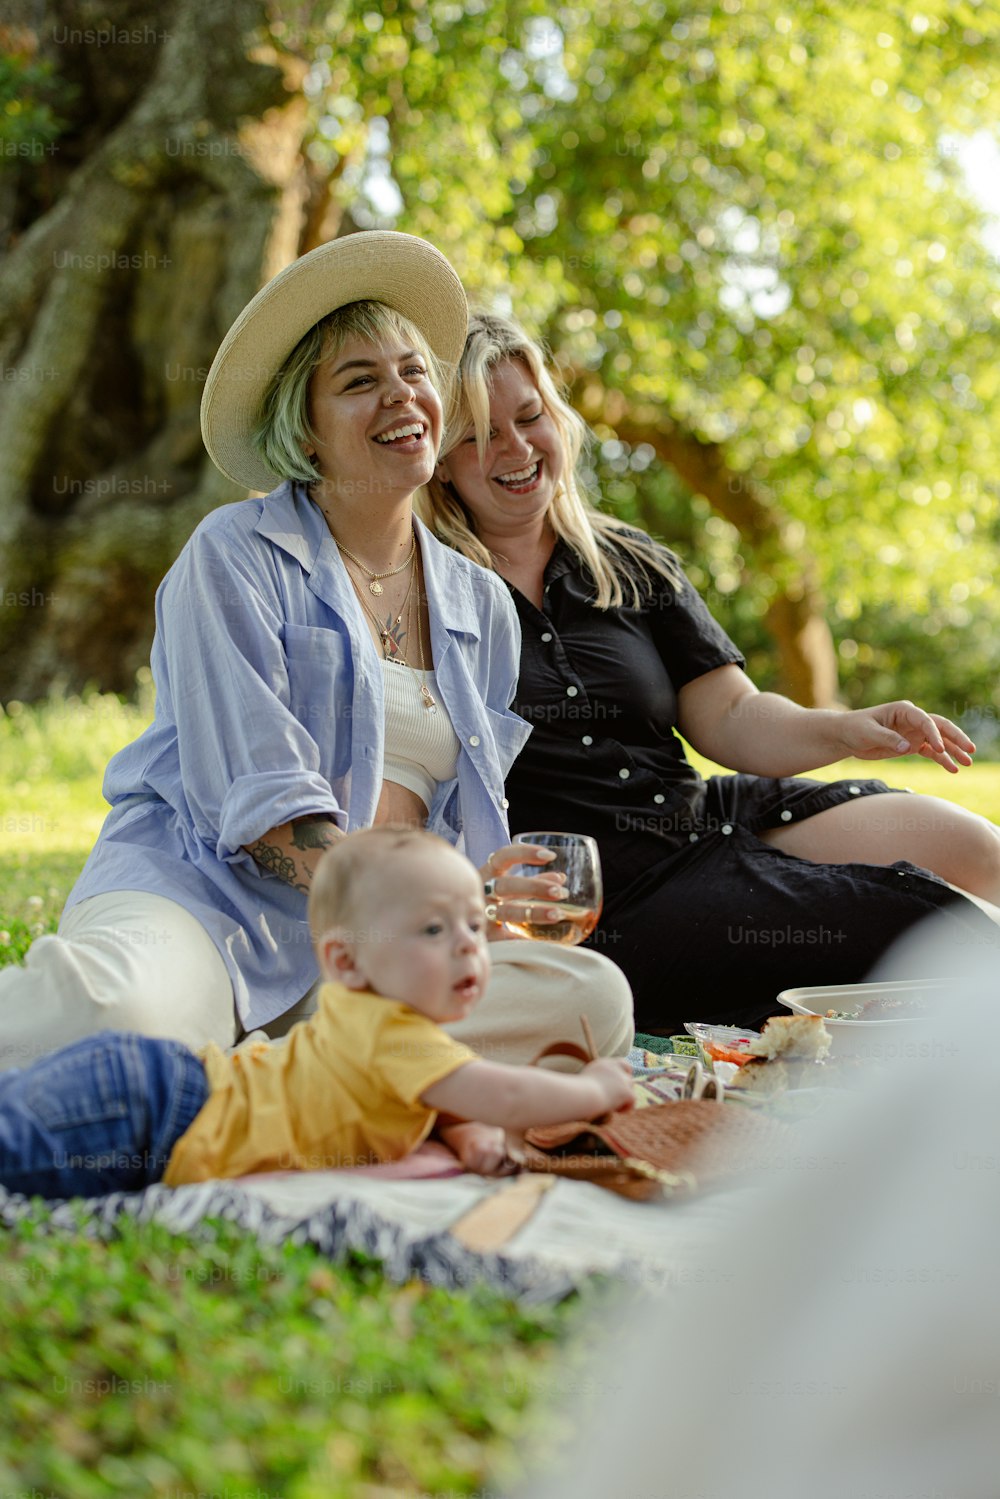 two women and a baby sitting on a blanket in a park